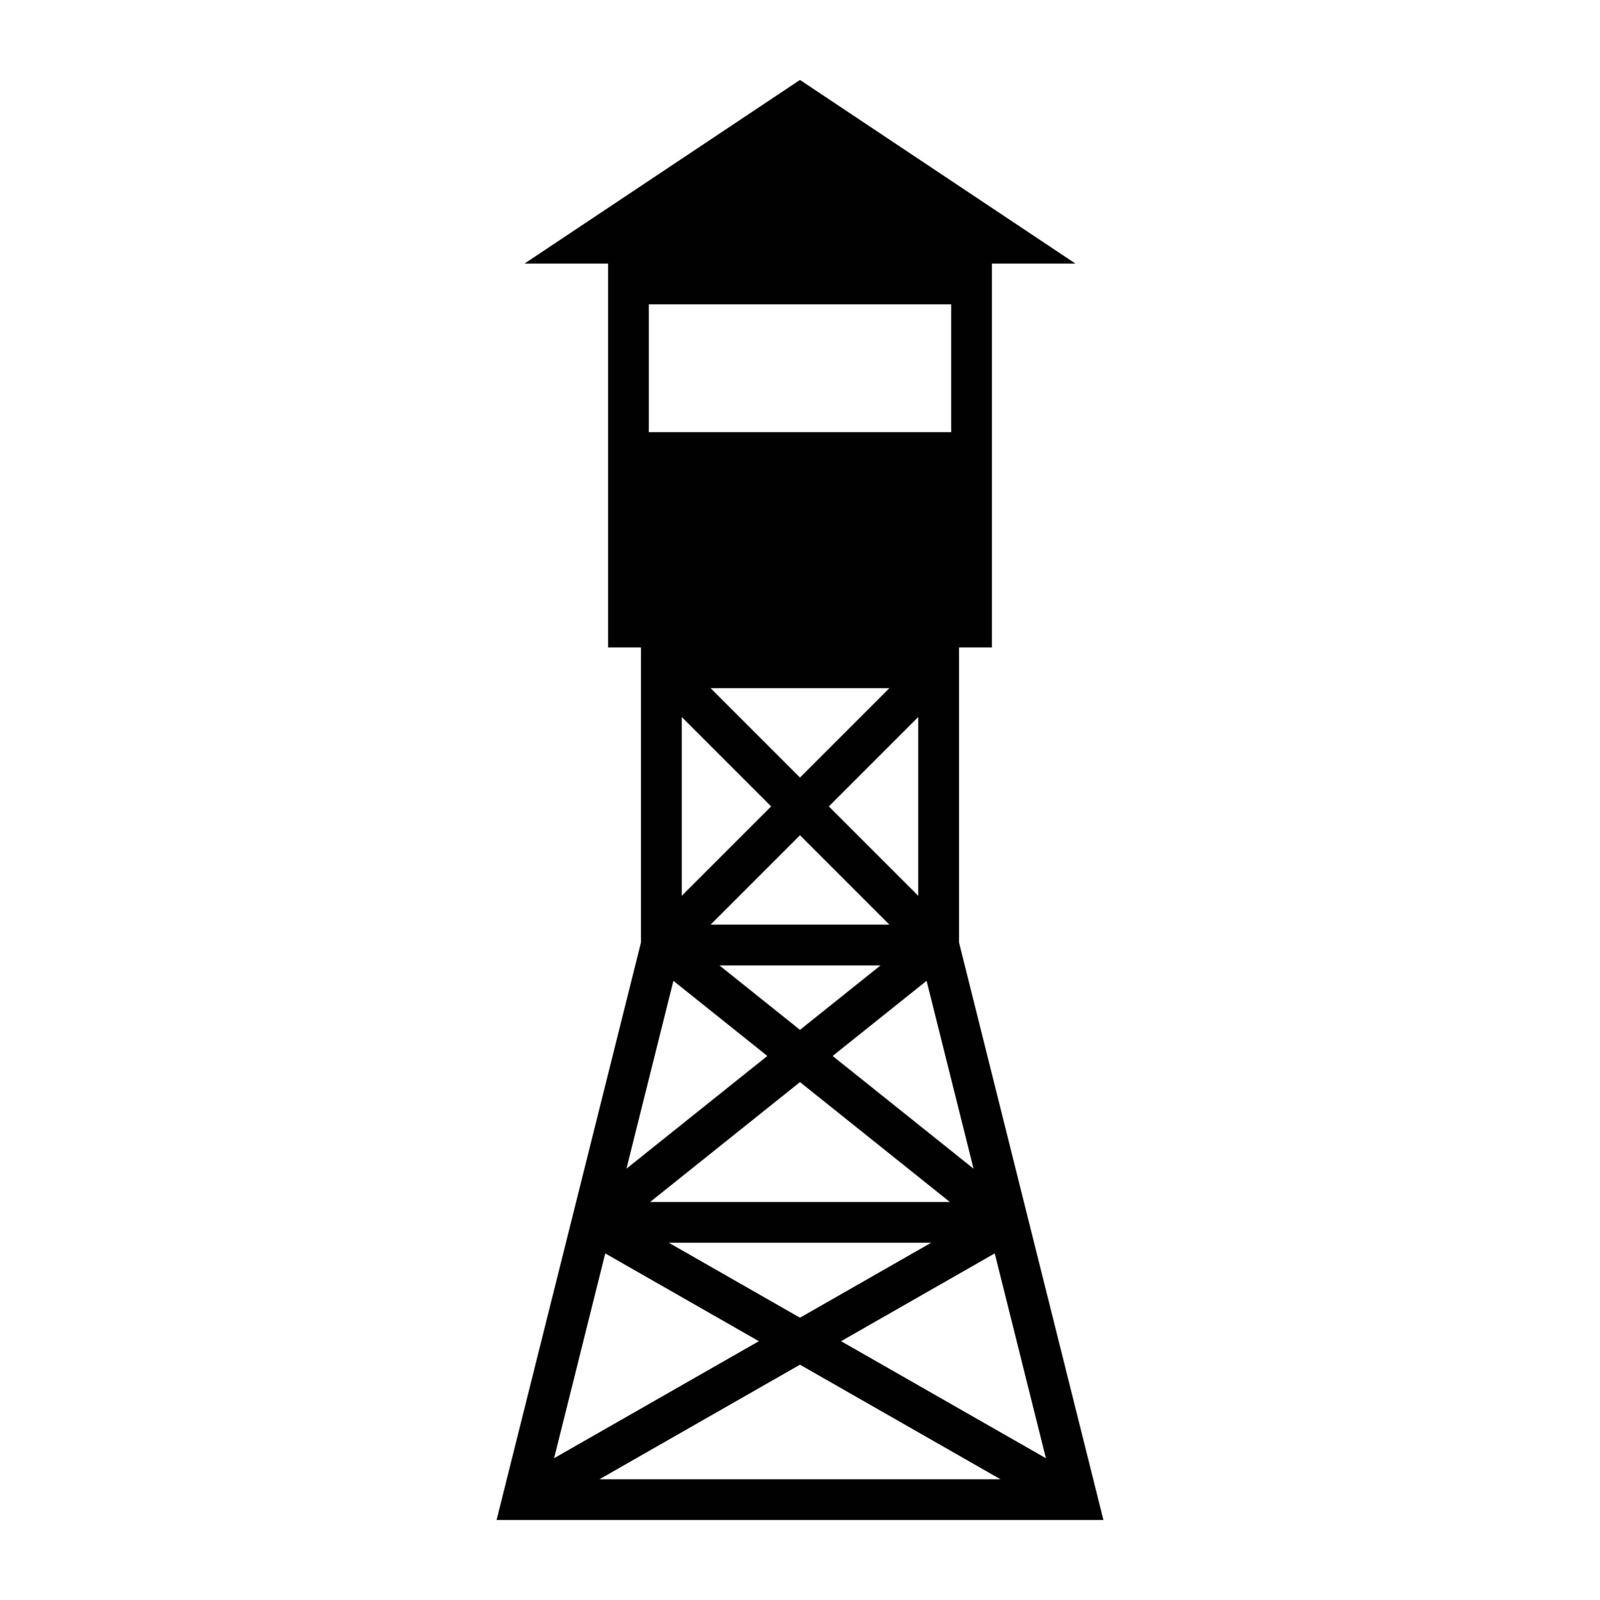 Watching tower Overview forest ranger fire site icon black color vector illustration flat style simple image